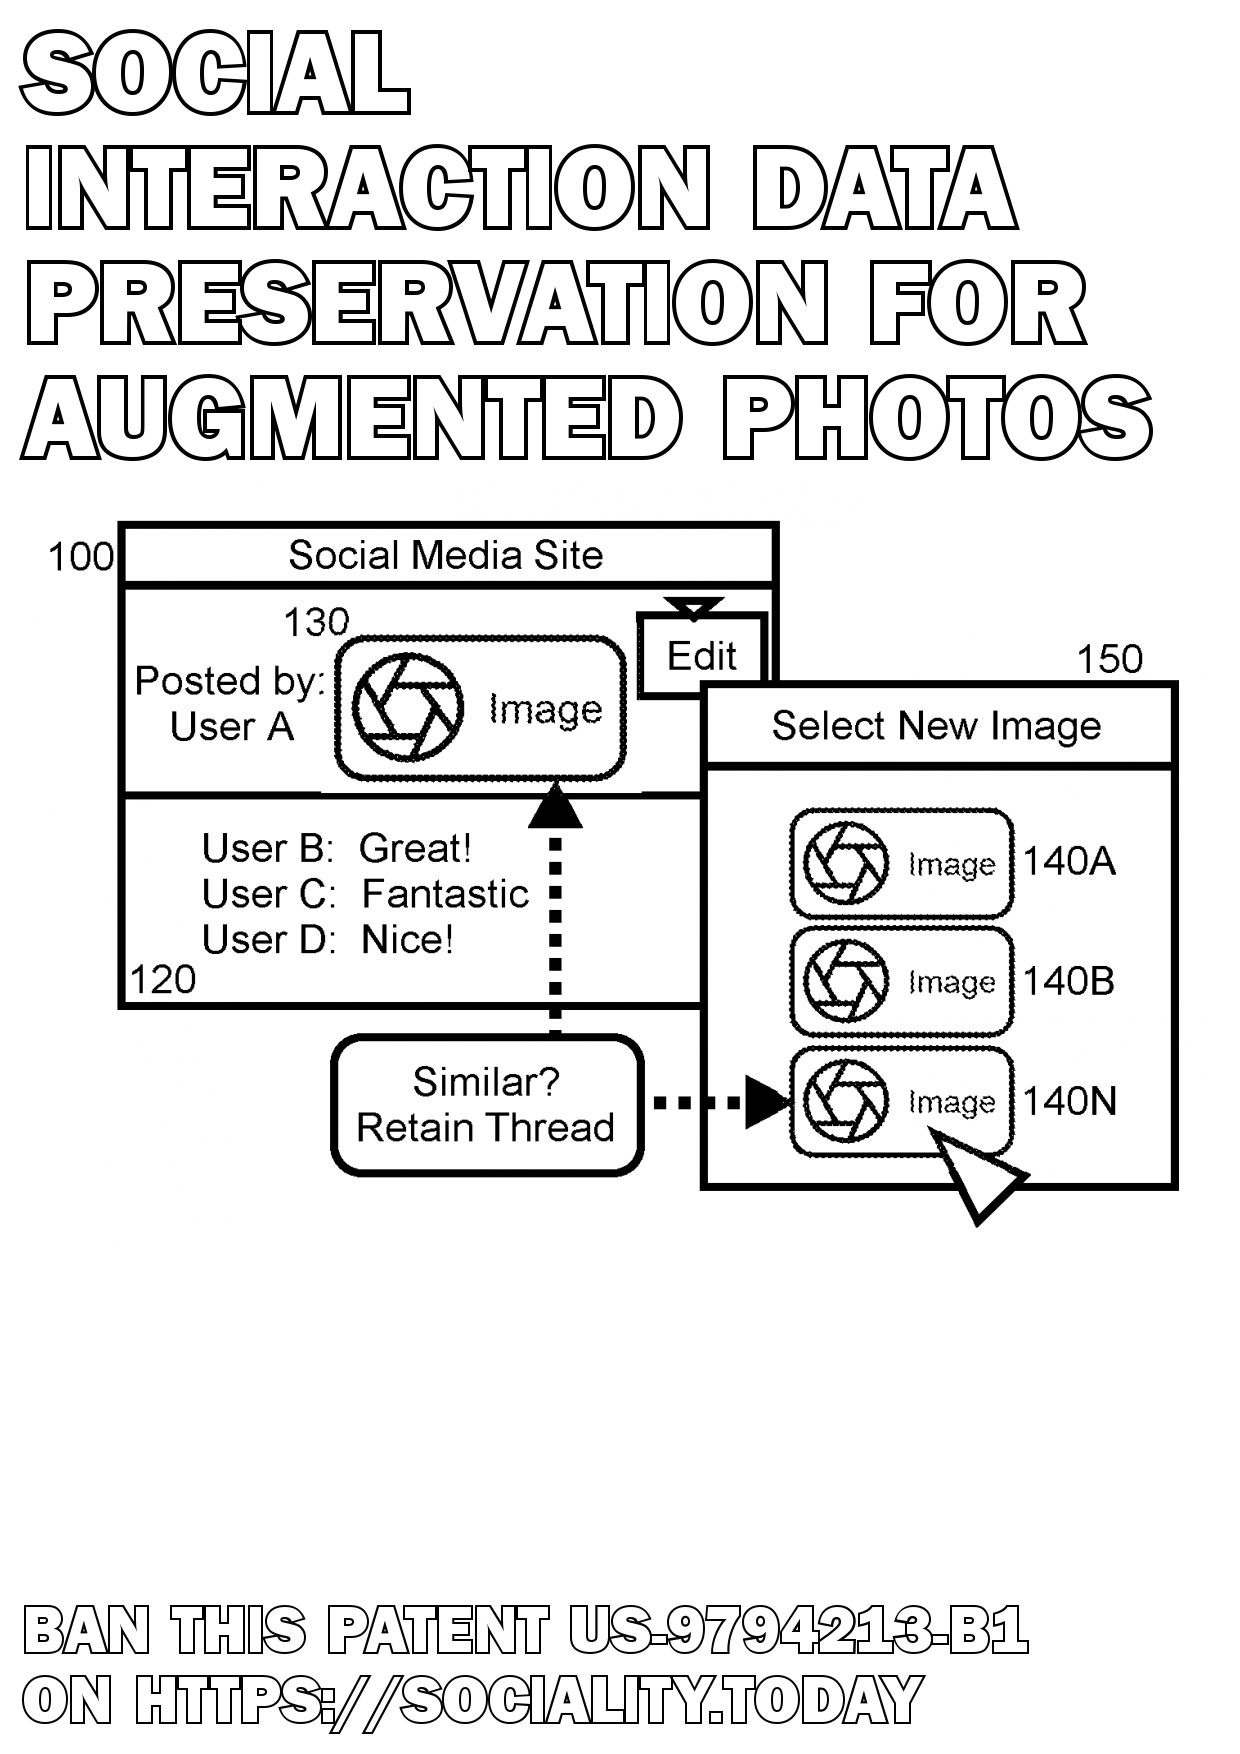 Social interaction data preservation for augmented photos  - US-9794213-B1